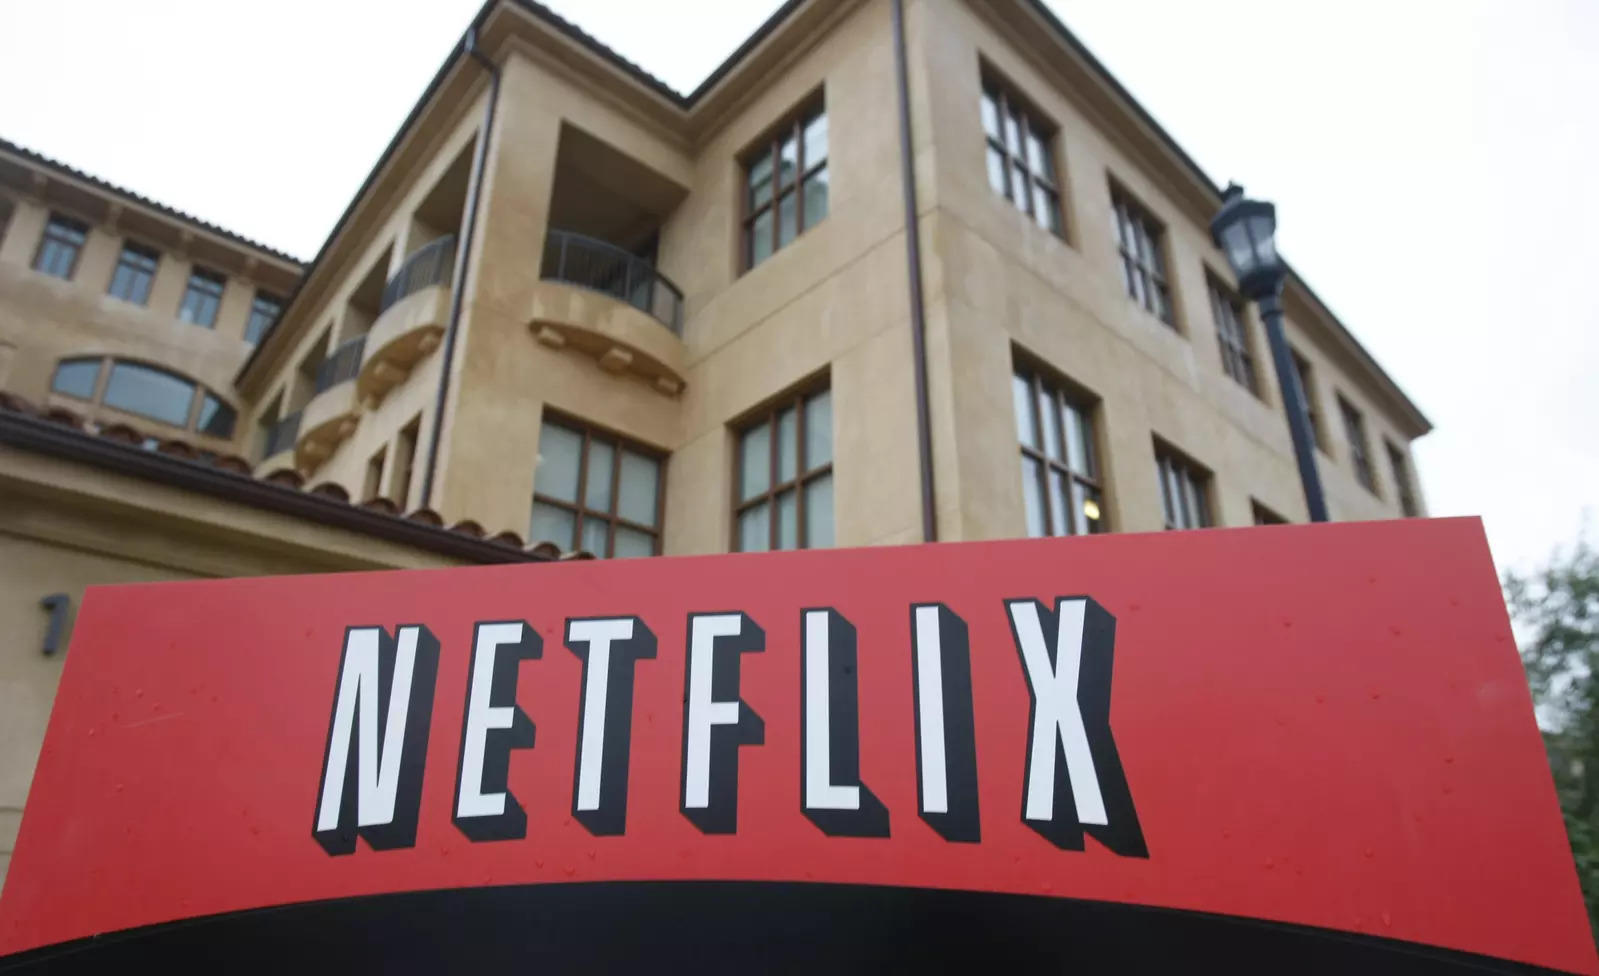 The company logo and view of Netflix headquarters in Los Gatos, Calif. (File photo)